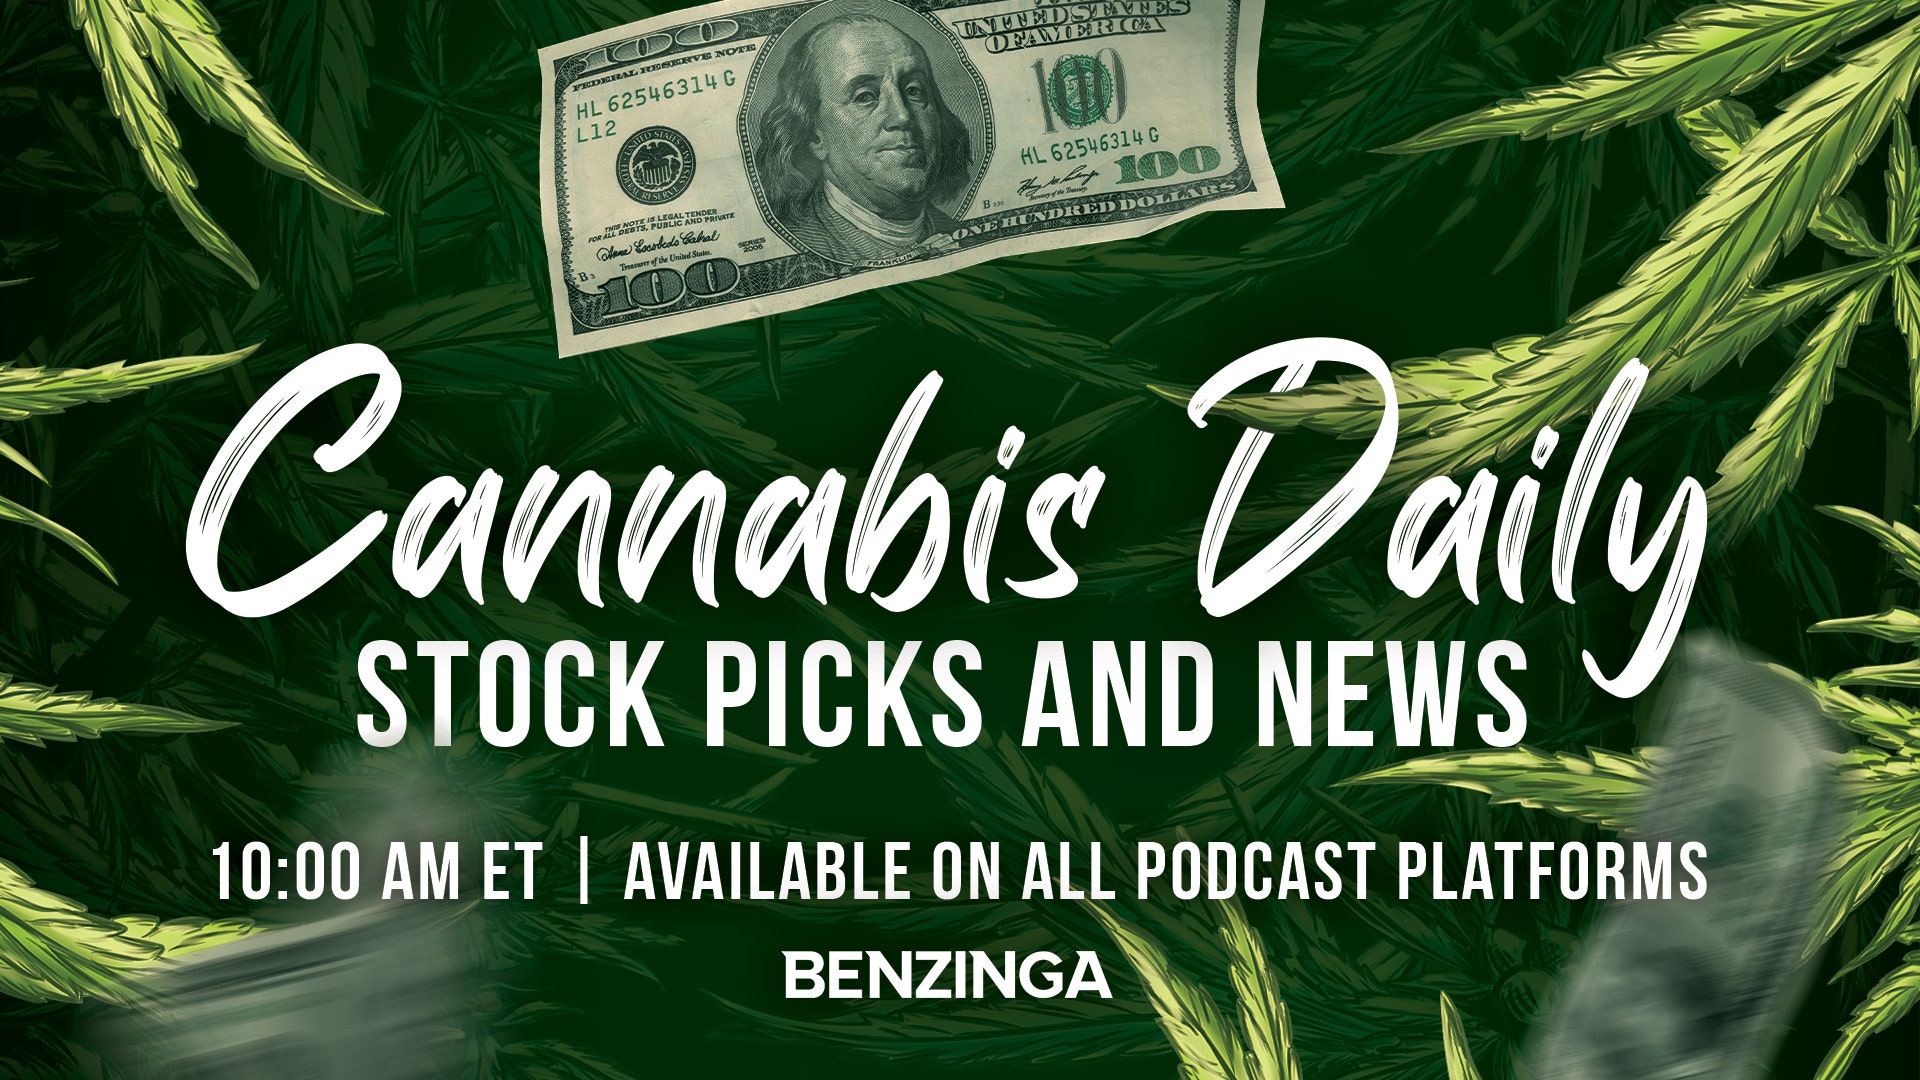 Number Of Marijuana Smokers Catch Up To That Of Cigarettes In US - Cannabis Daily Podcast 8/18